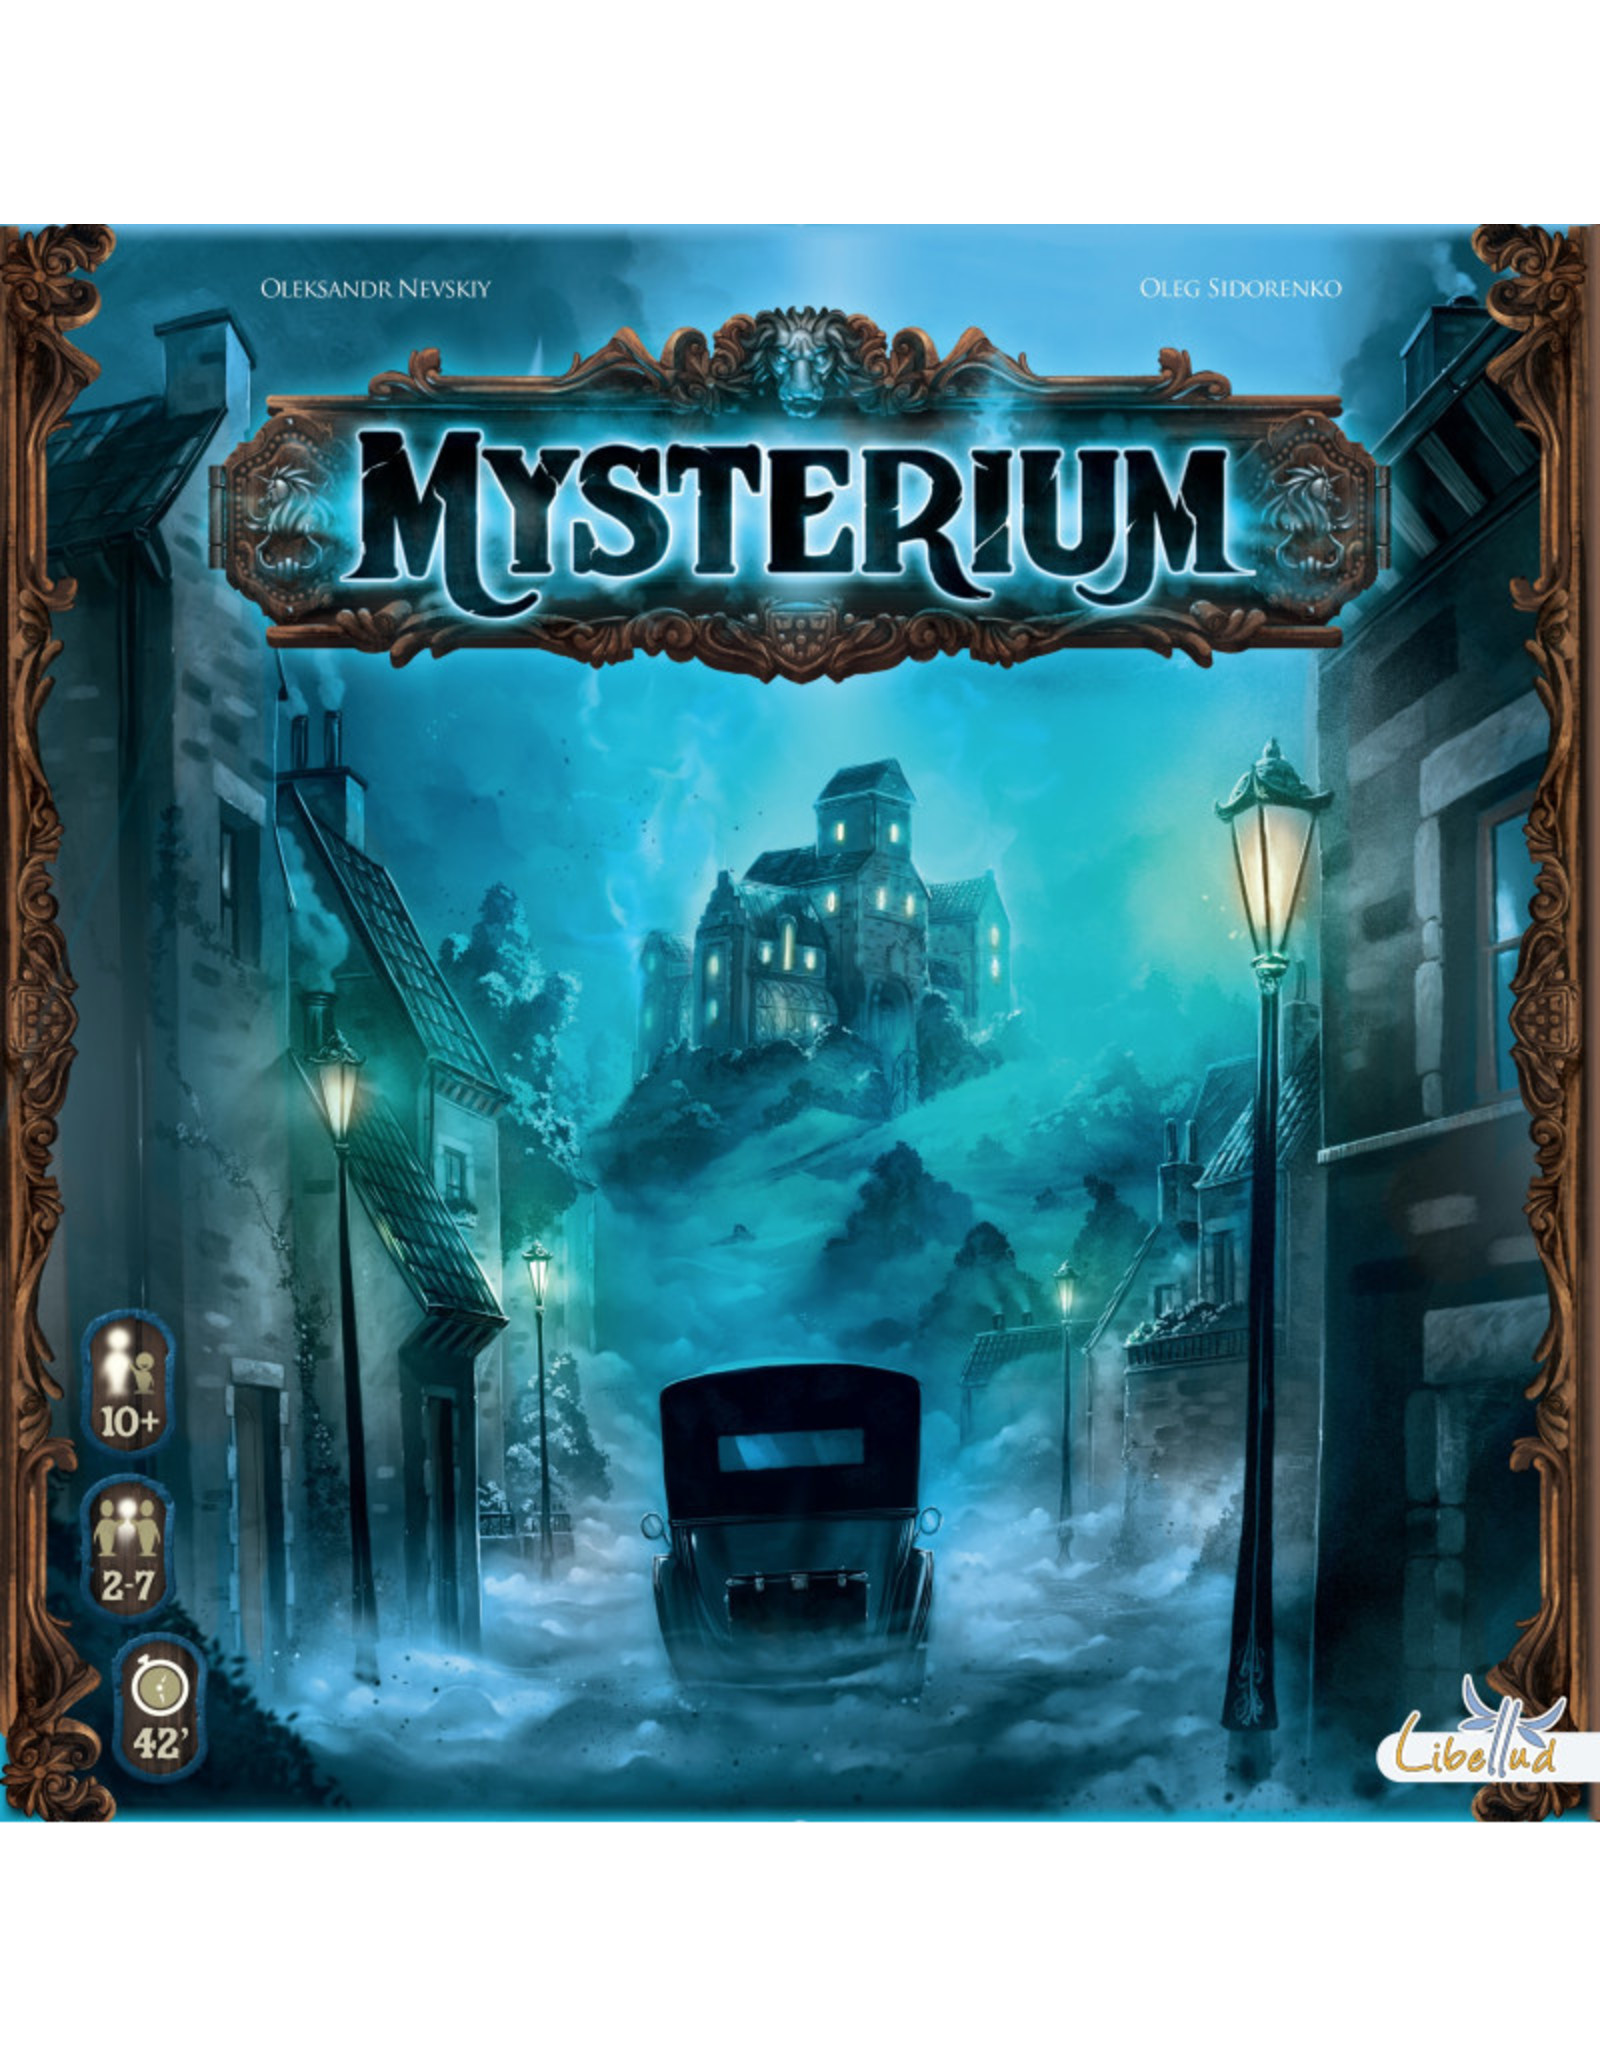 Libellud - Mysterium - Card Game